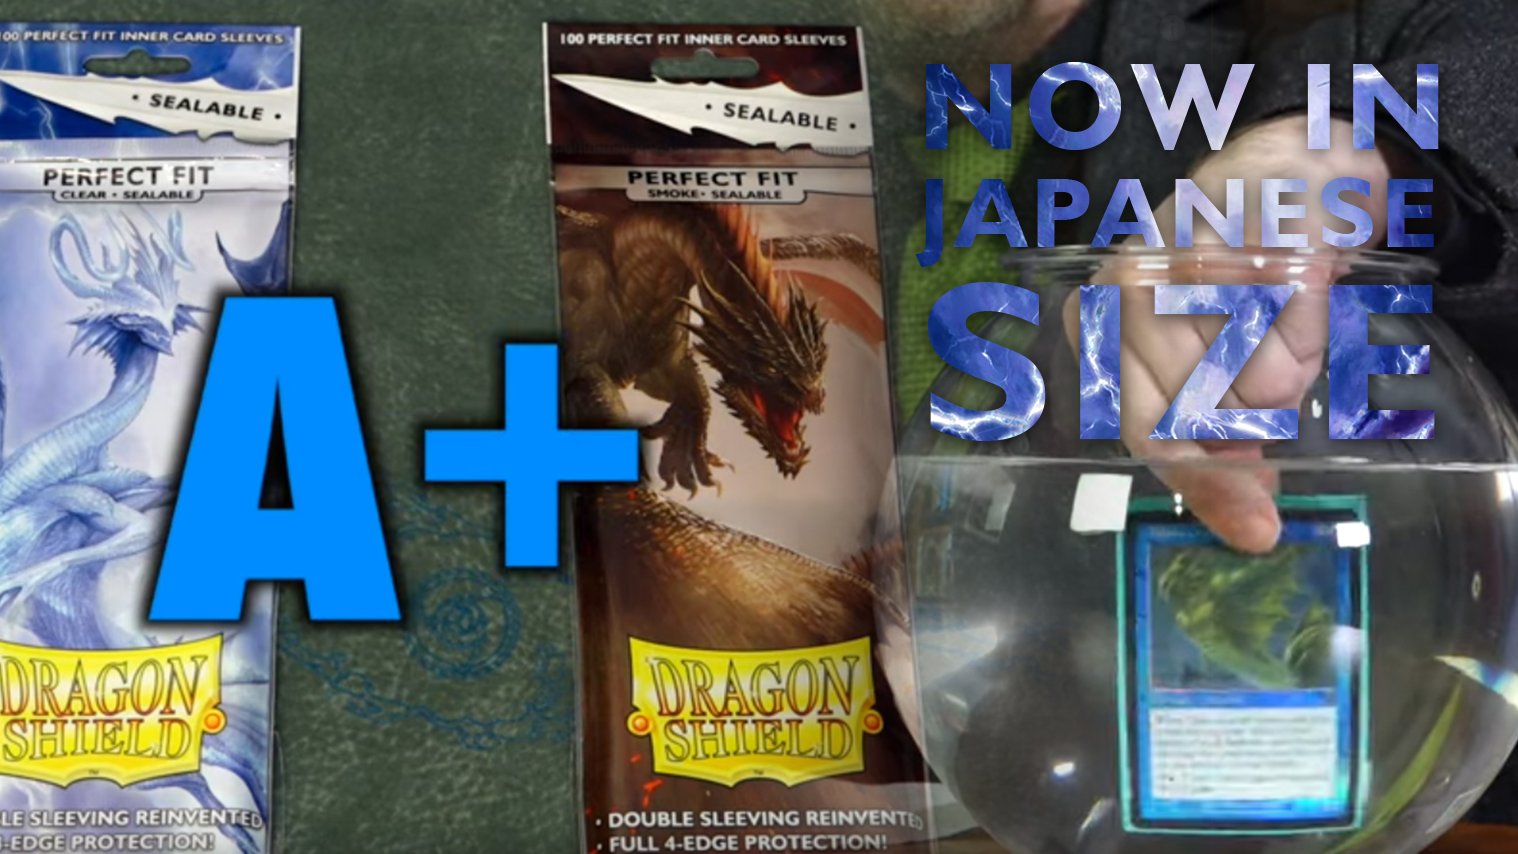 Dragon Shield on X: Take protection to the next level! Perfect Fit Sealable  inner sleeves now in Japanese size! Watch this reviewer do the water bowl  test!  (yes, he shows std